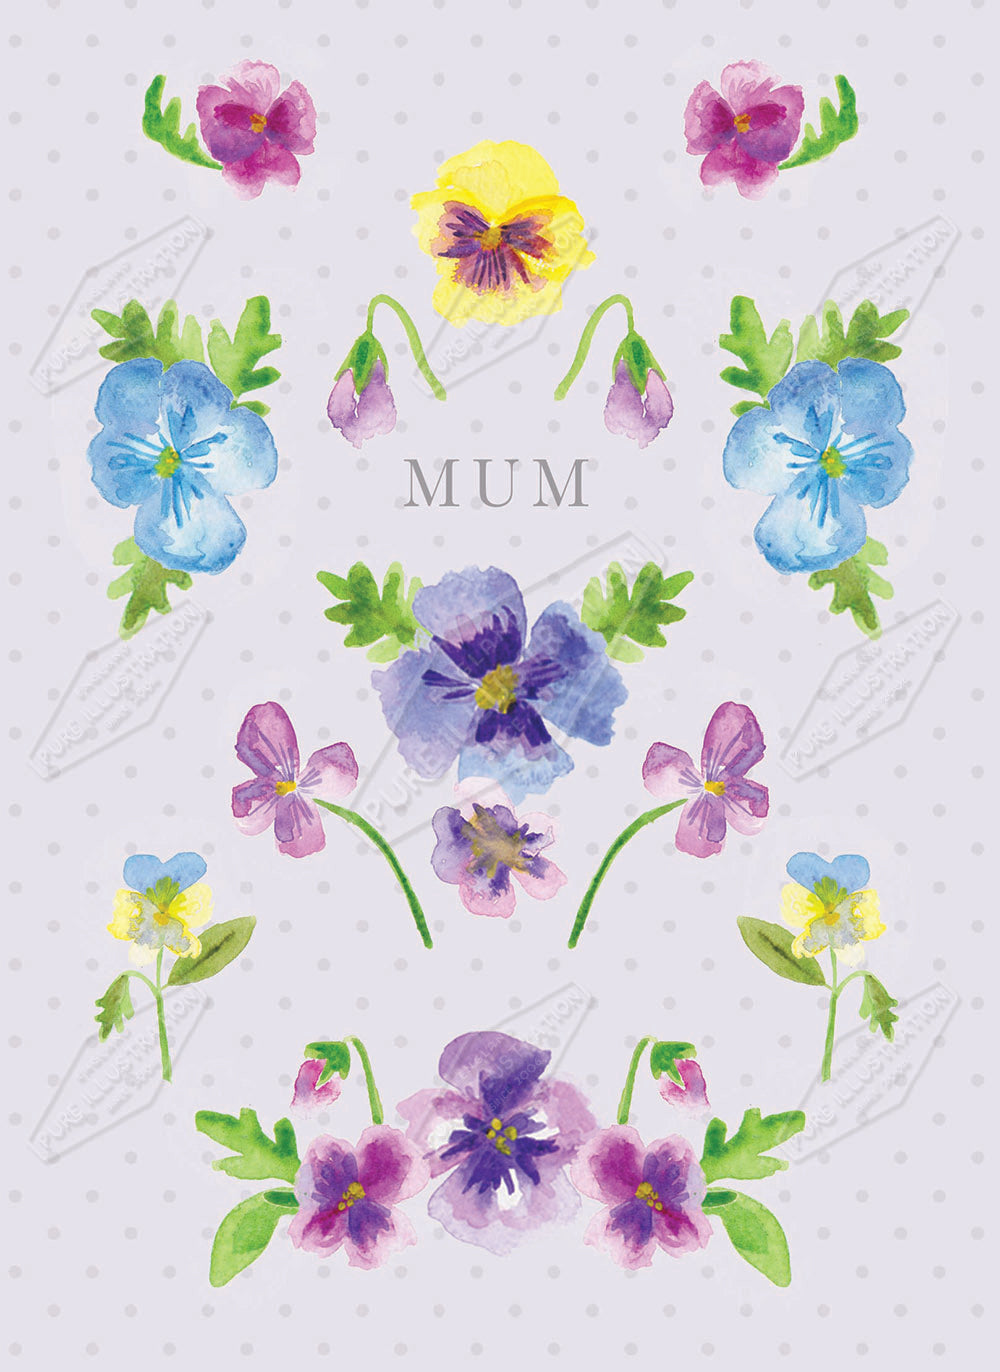 00034384SLA- Sarah Lake is represented by Pure Art Licensing Agency - Mother's Day Greeting Card Design